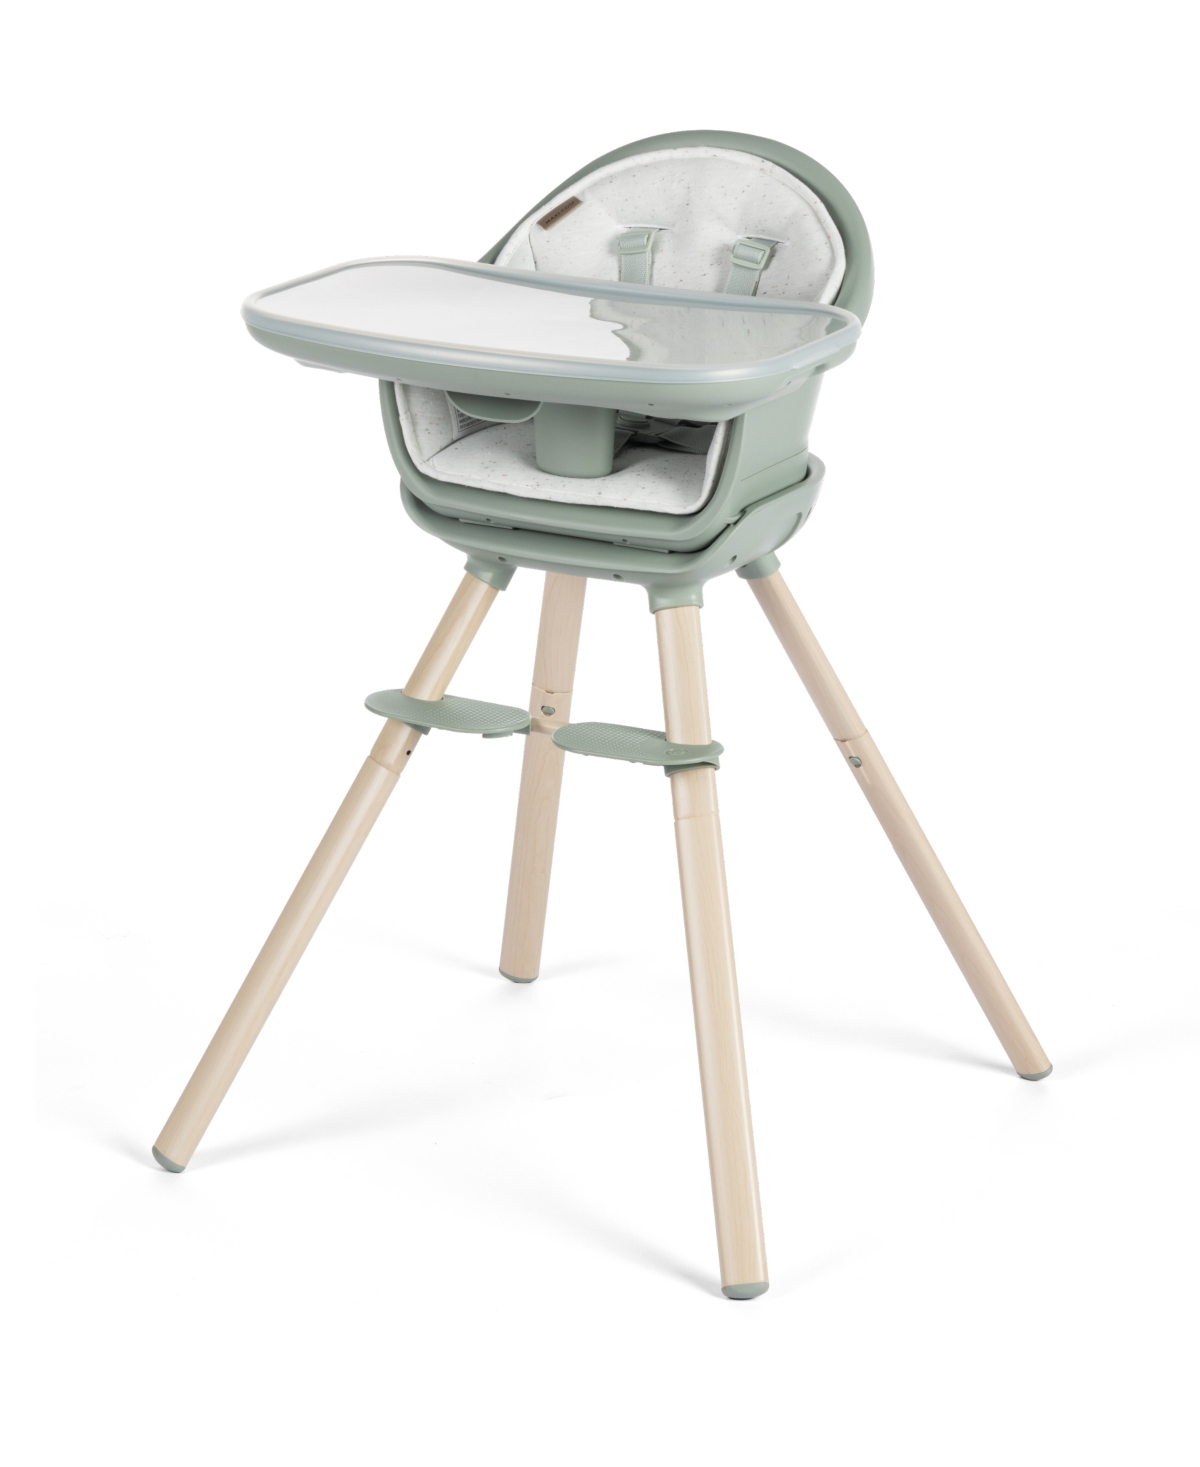 Maxi-cosi Baby Boys Or Baby Girls Moa 8-in-1 Highchair In Classic Green